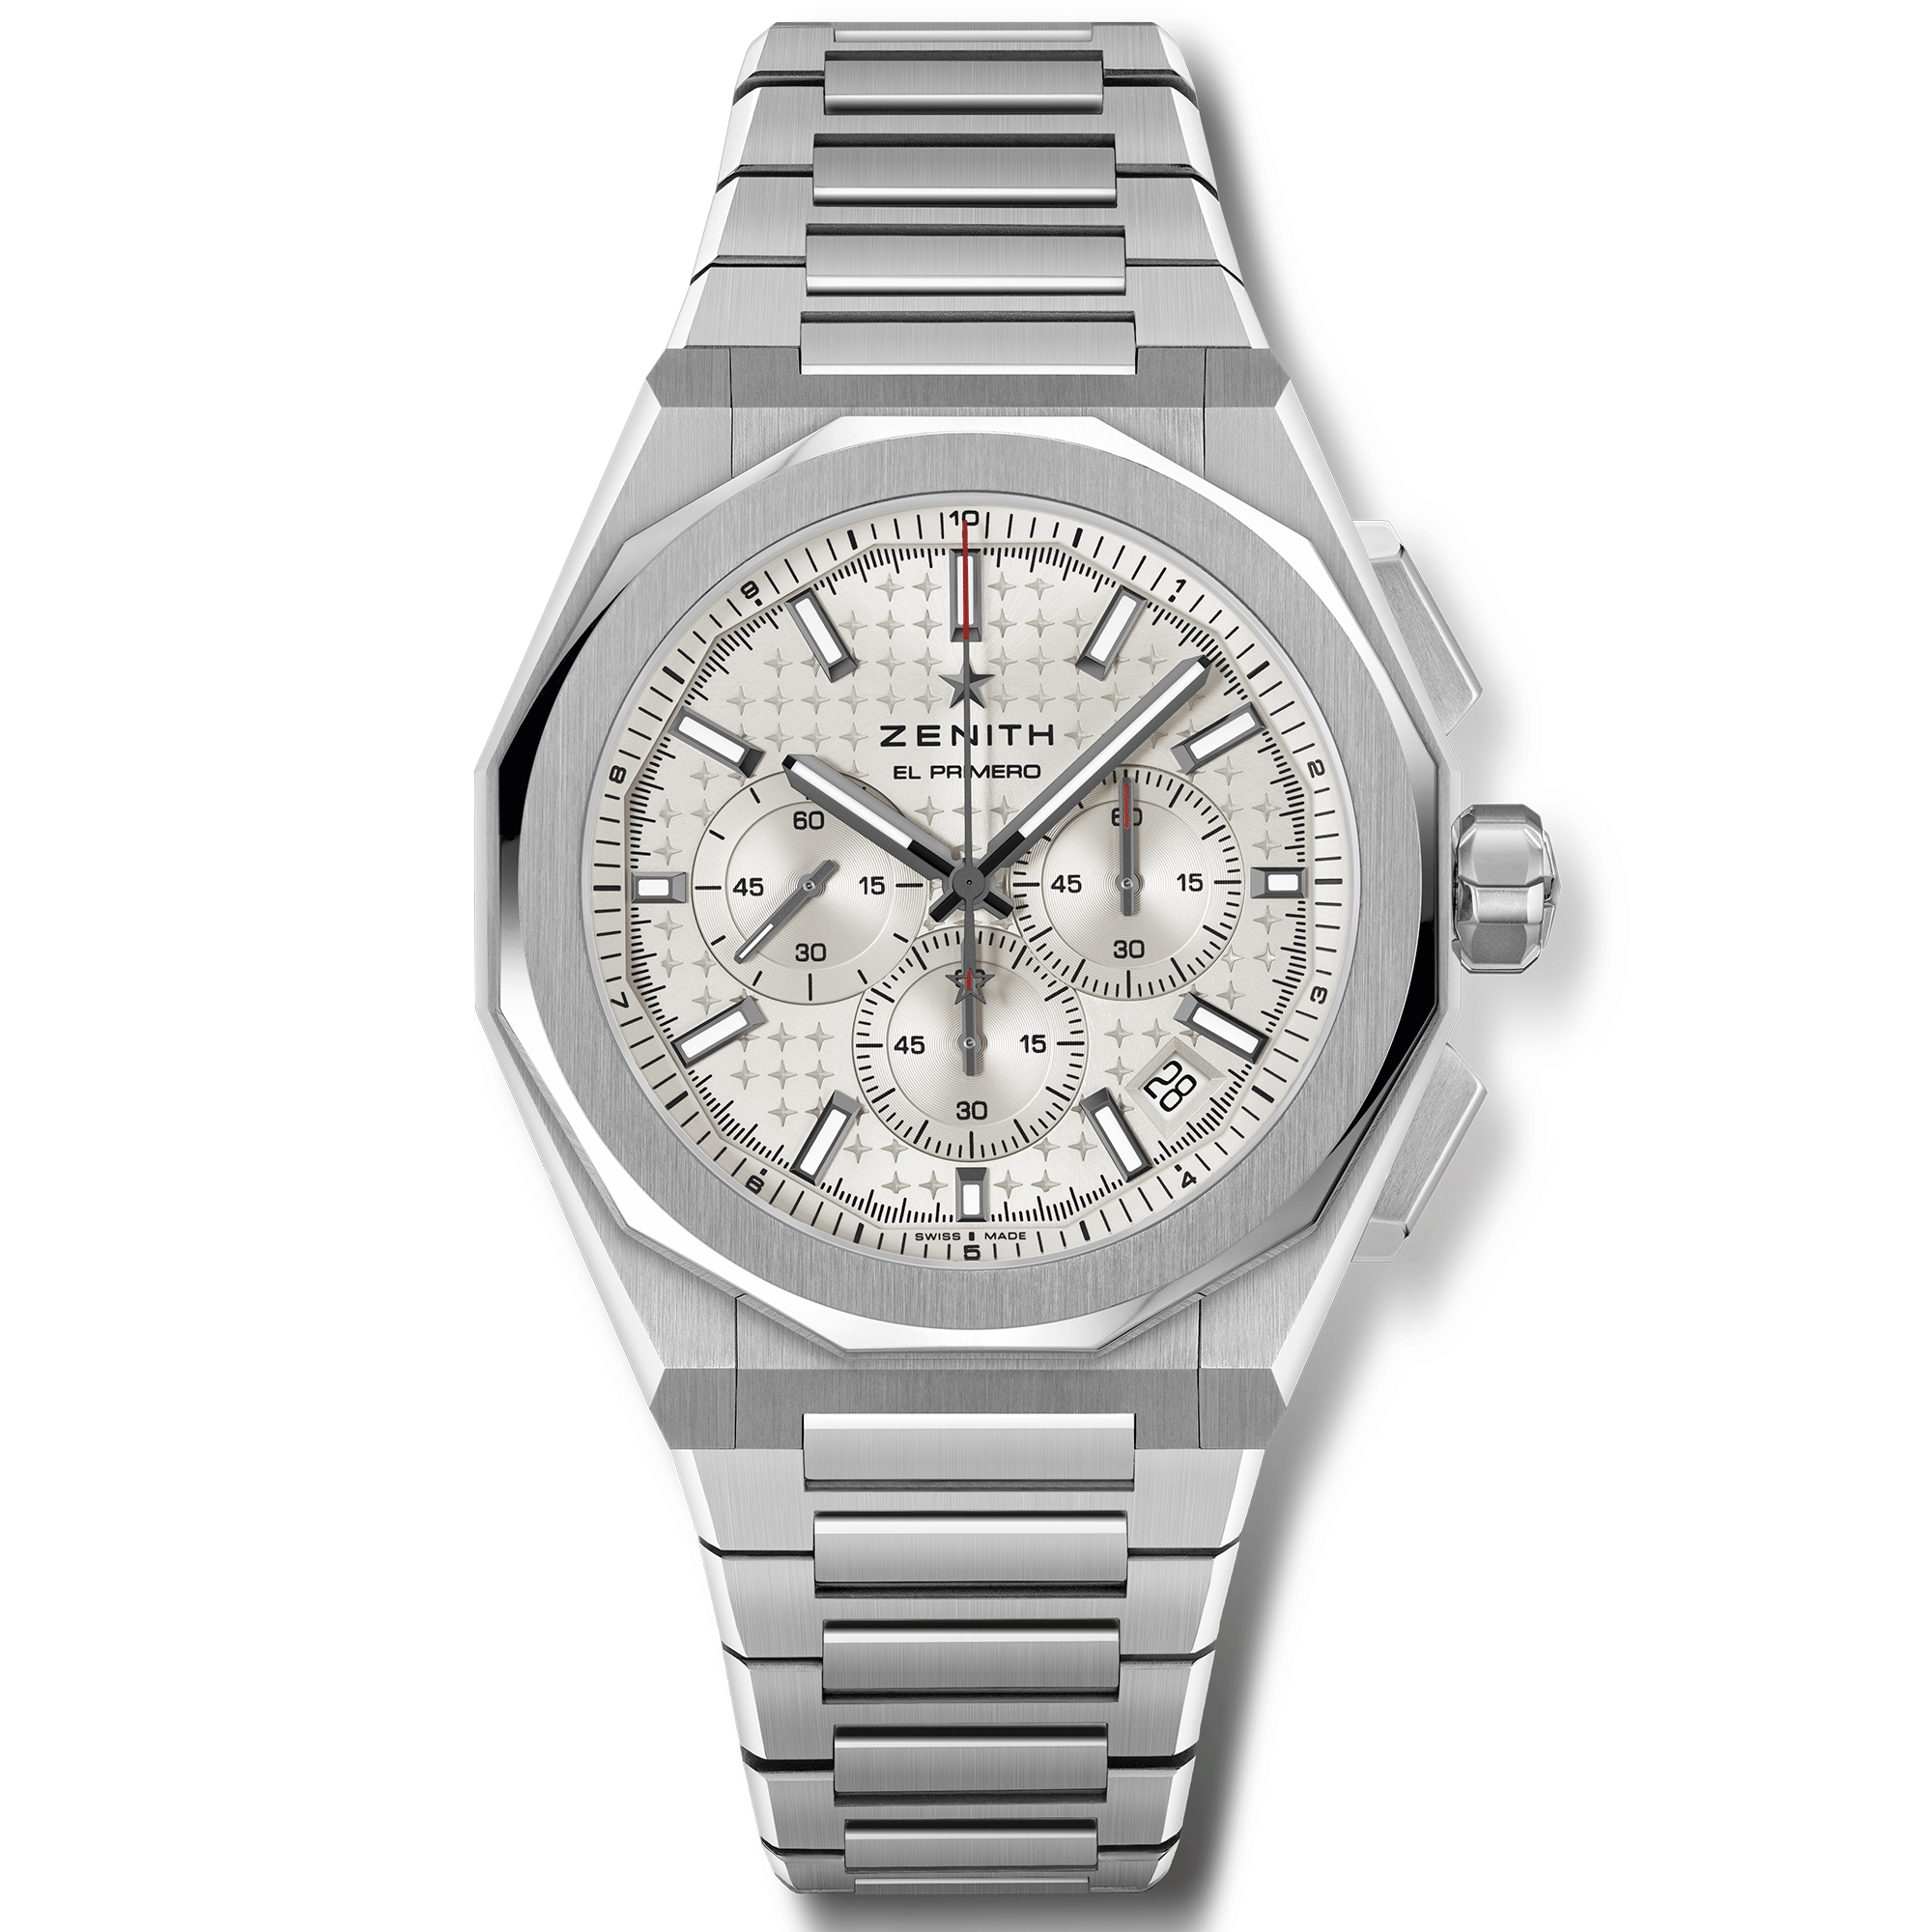 DEFY Skyline Chronograph 42mm Silver Dial Men's Automatic Watch